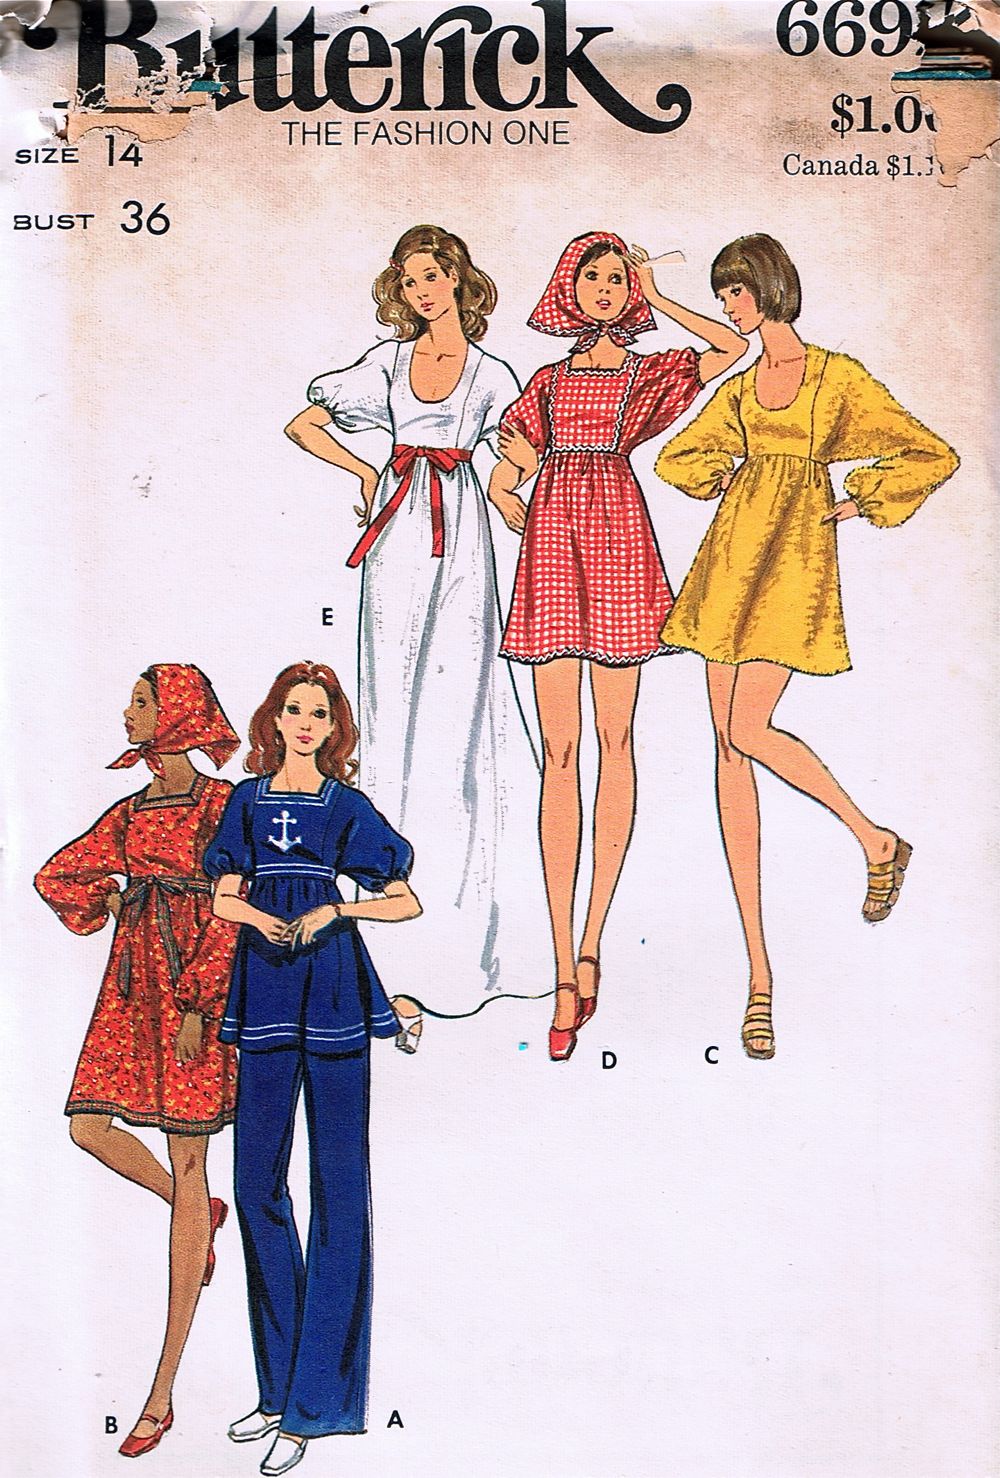 Butterick 6692 | Vintage Sewing Patterns | FANDOM powered by Wikia